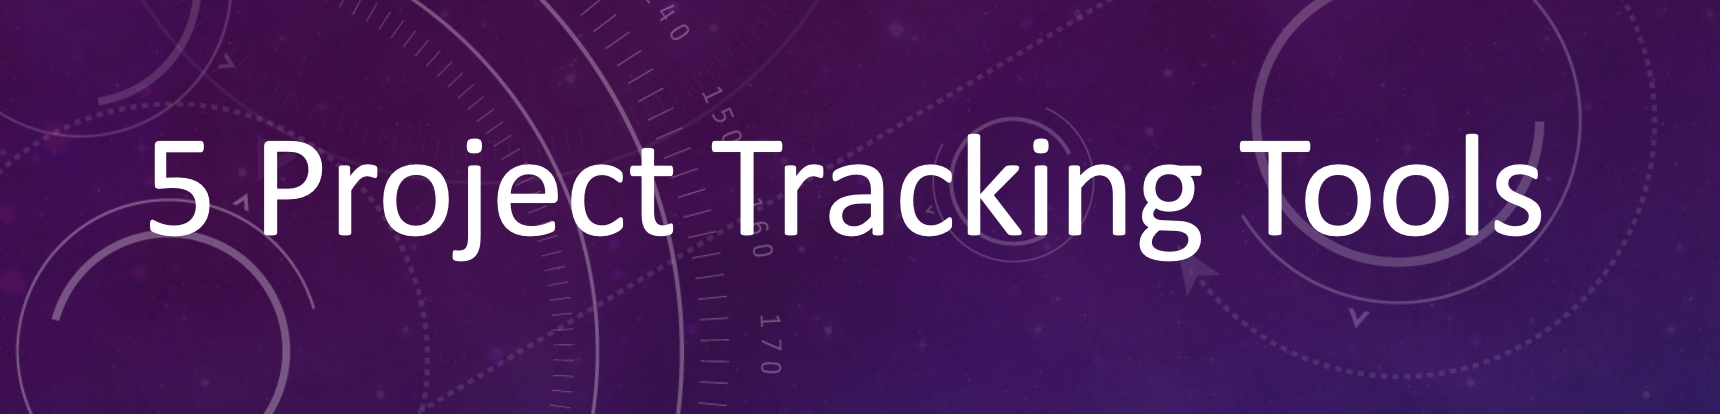 5 Project Tracking Tools